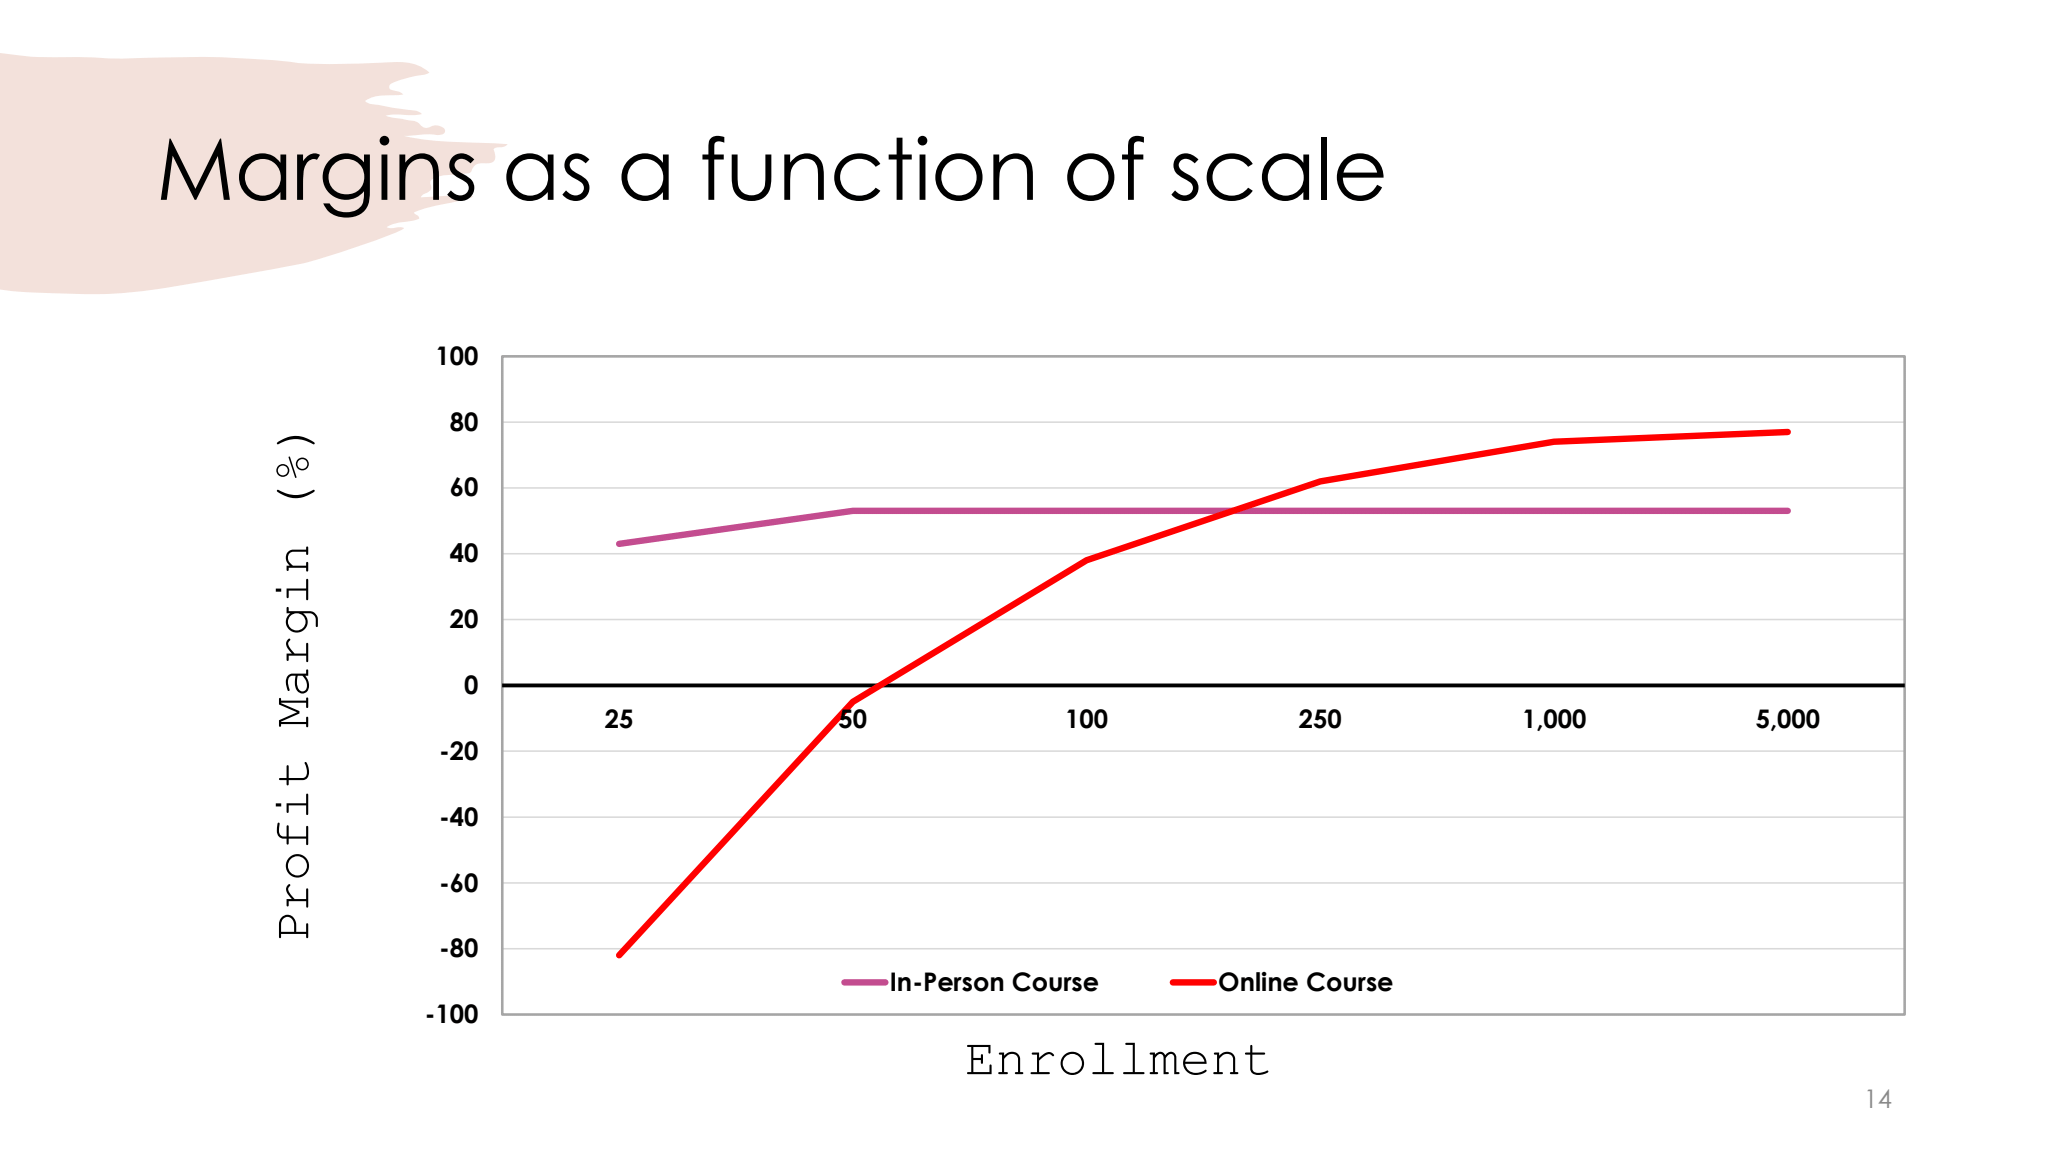 Margins as a function of scale